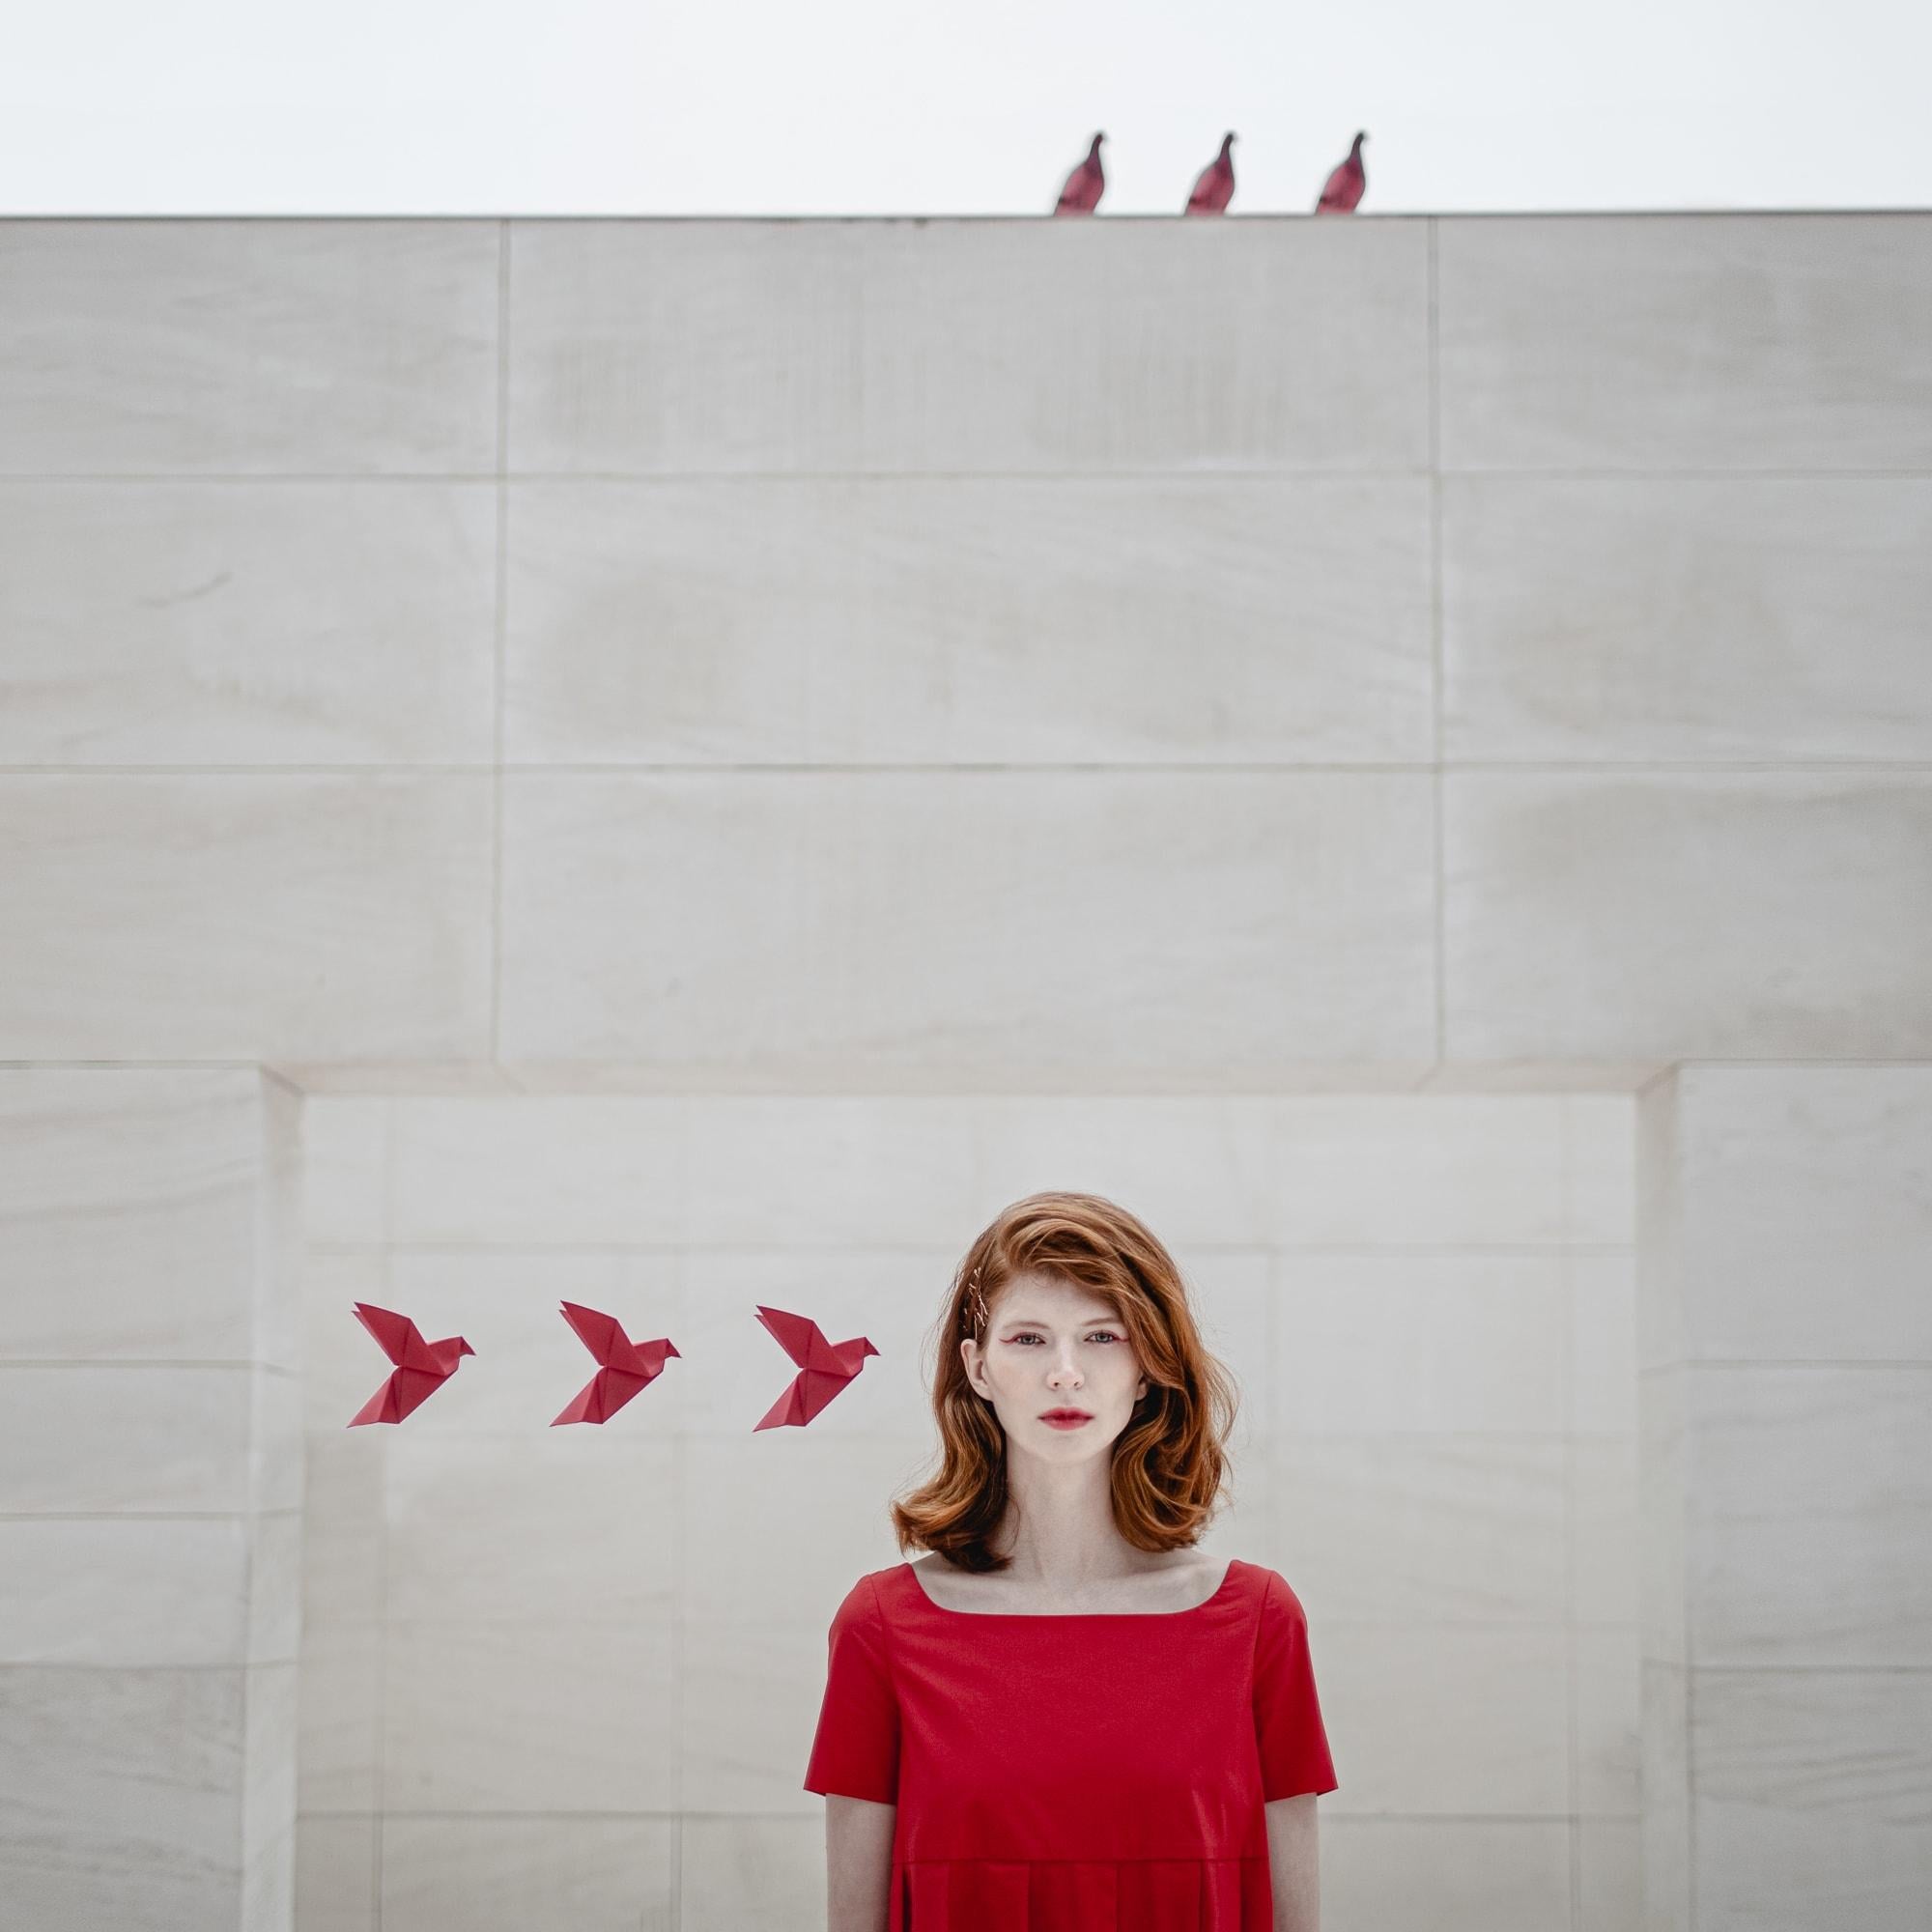 This beautifully vibrant red surreal portrait was shot in Barcelona. Dasha Pears cleverly combines origami birds with real birds to create a balanced minimalist composition. This is a limited edition color photograph. Number 1 of 8 is currently